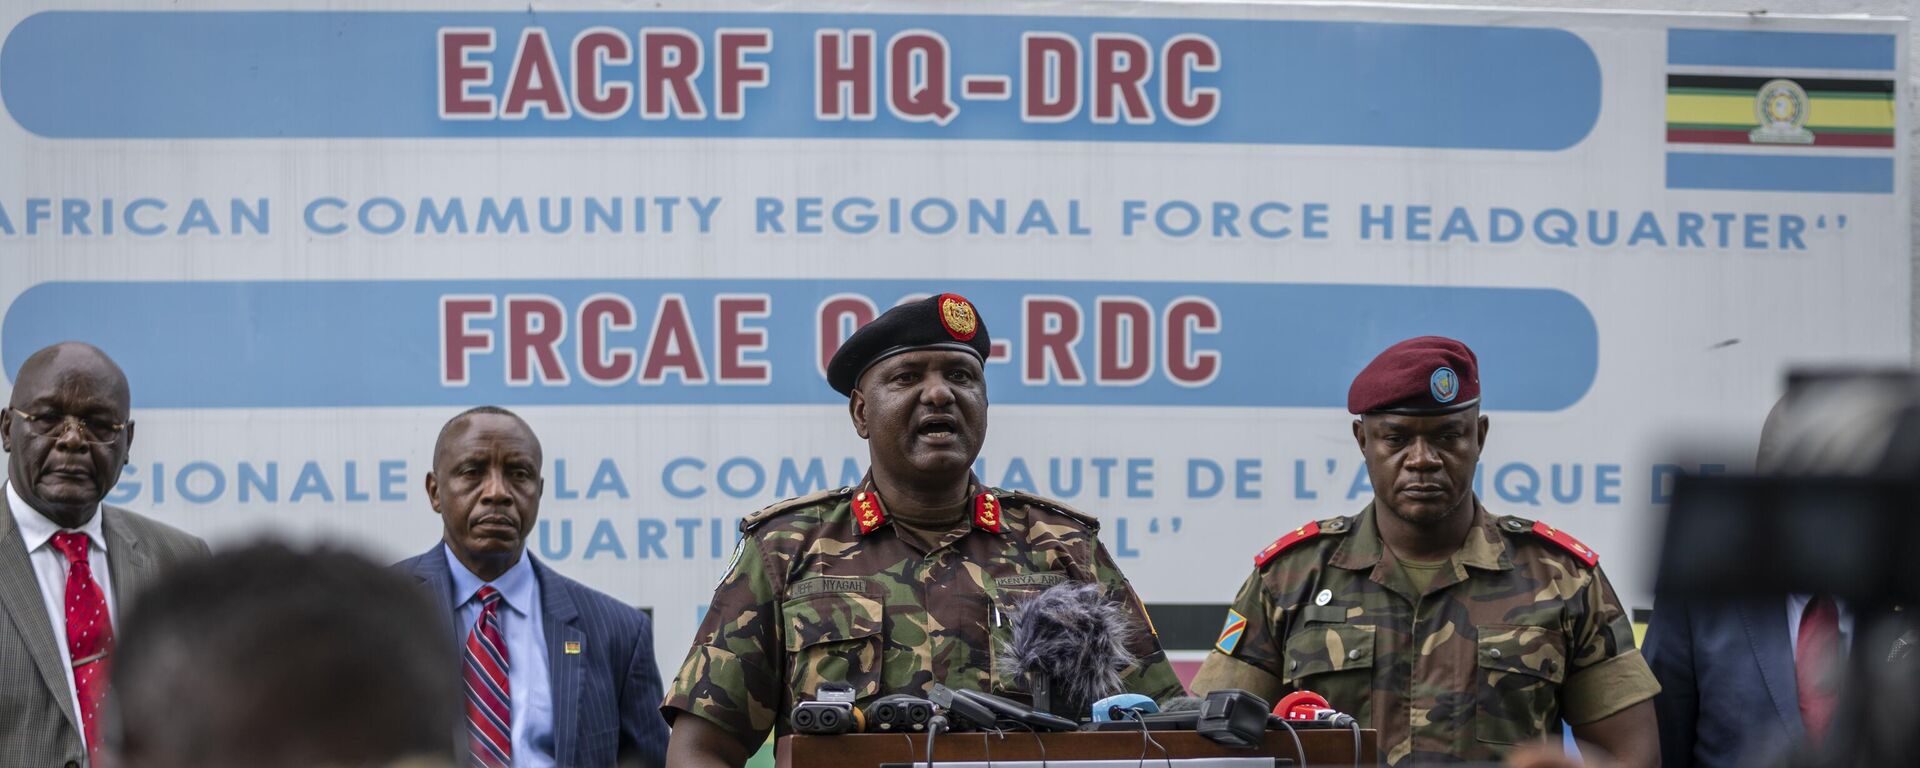 Kenya's Major-General Jeff Nyagah, force commander of the East African Community Regional Force (EACRF), center, speaks to the media accompanied by deputy force commander Congo's Jerome Chico Tshitambwe, right, outside the force headquarters in Goma, in eastern Congo Wednesday, Nov. 16, 2022. - Sputnik International, 1920, 20.11.2022